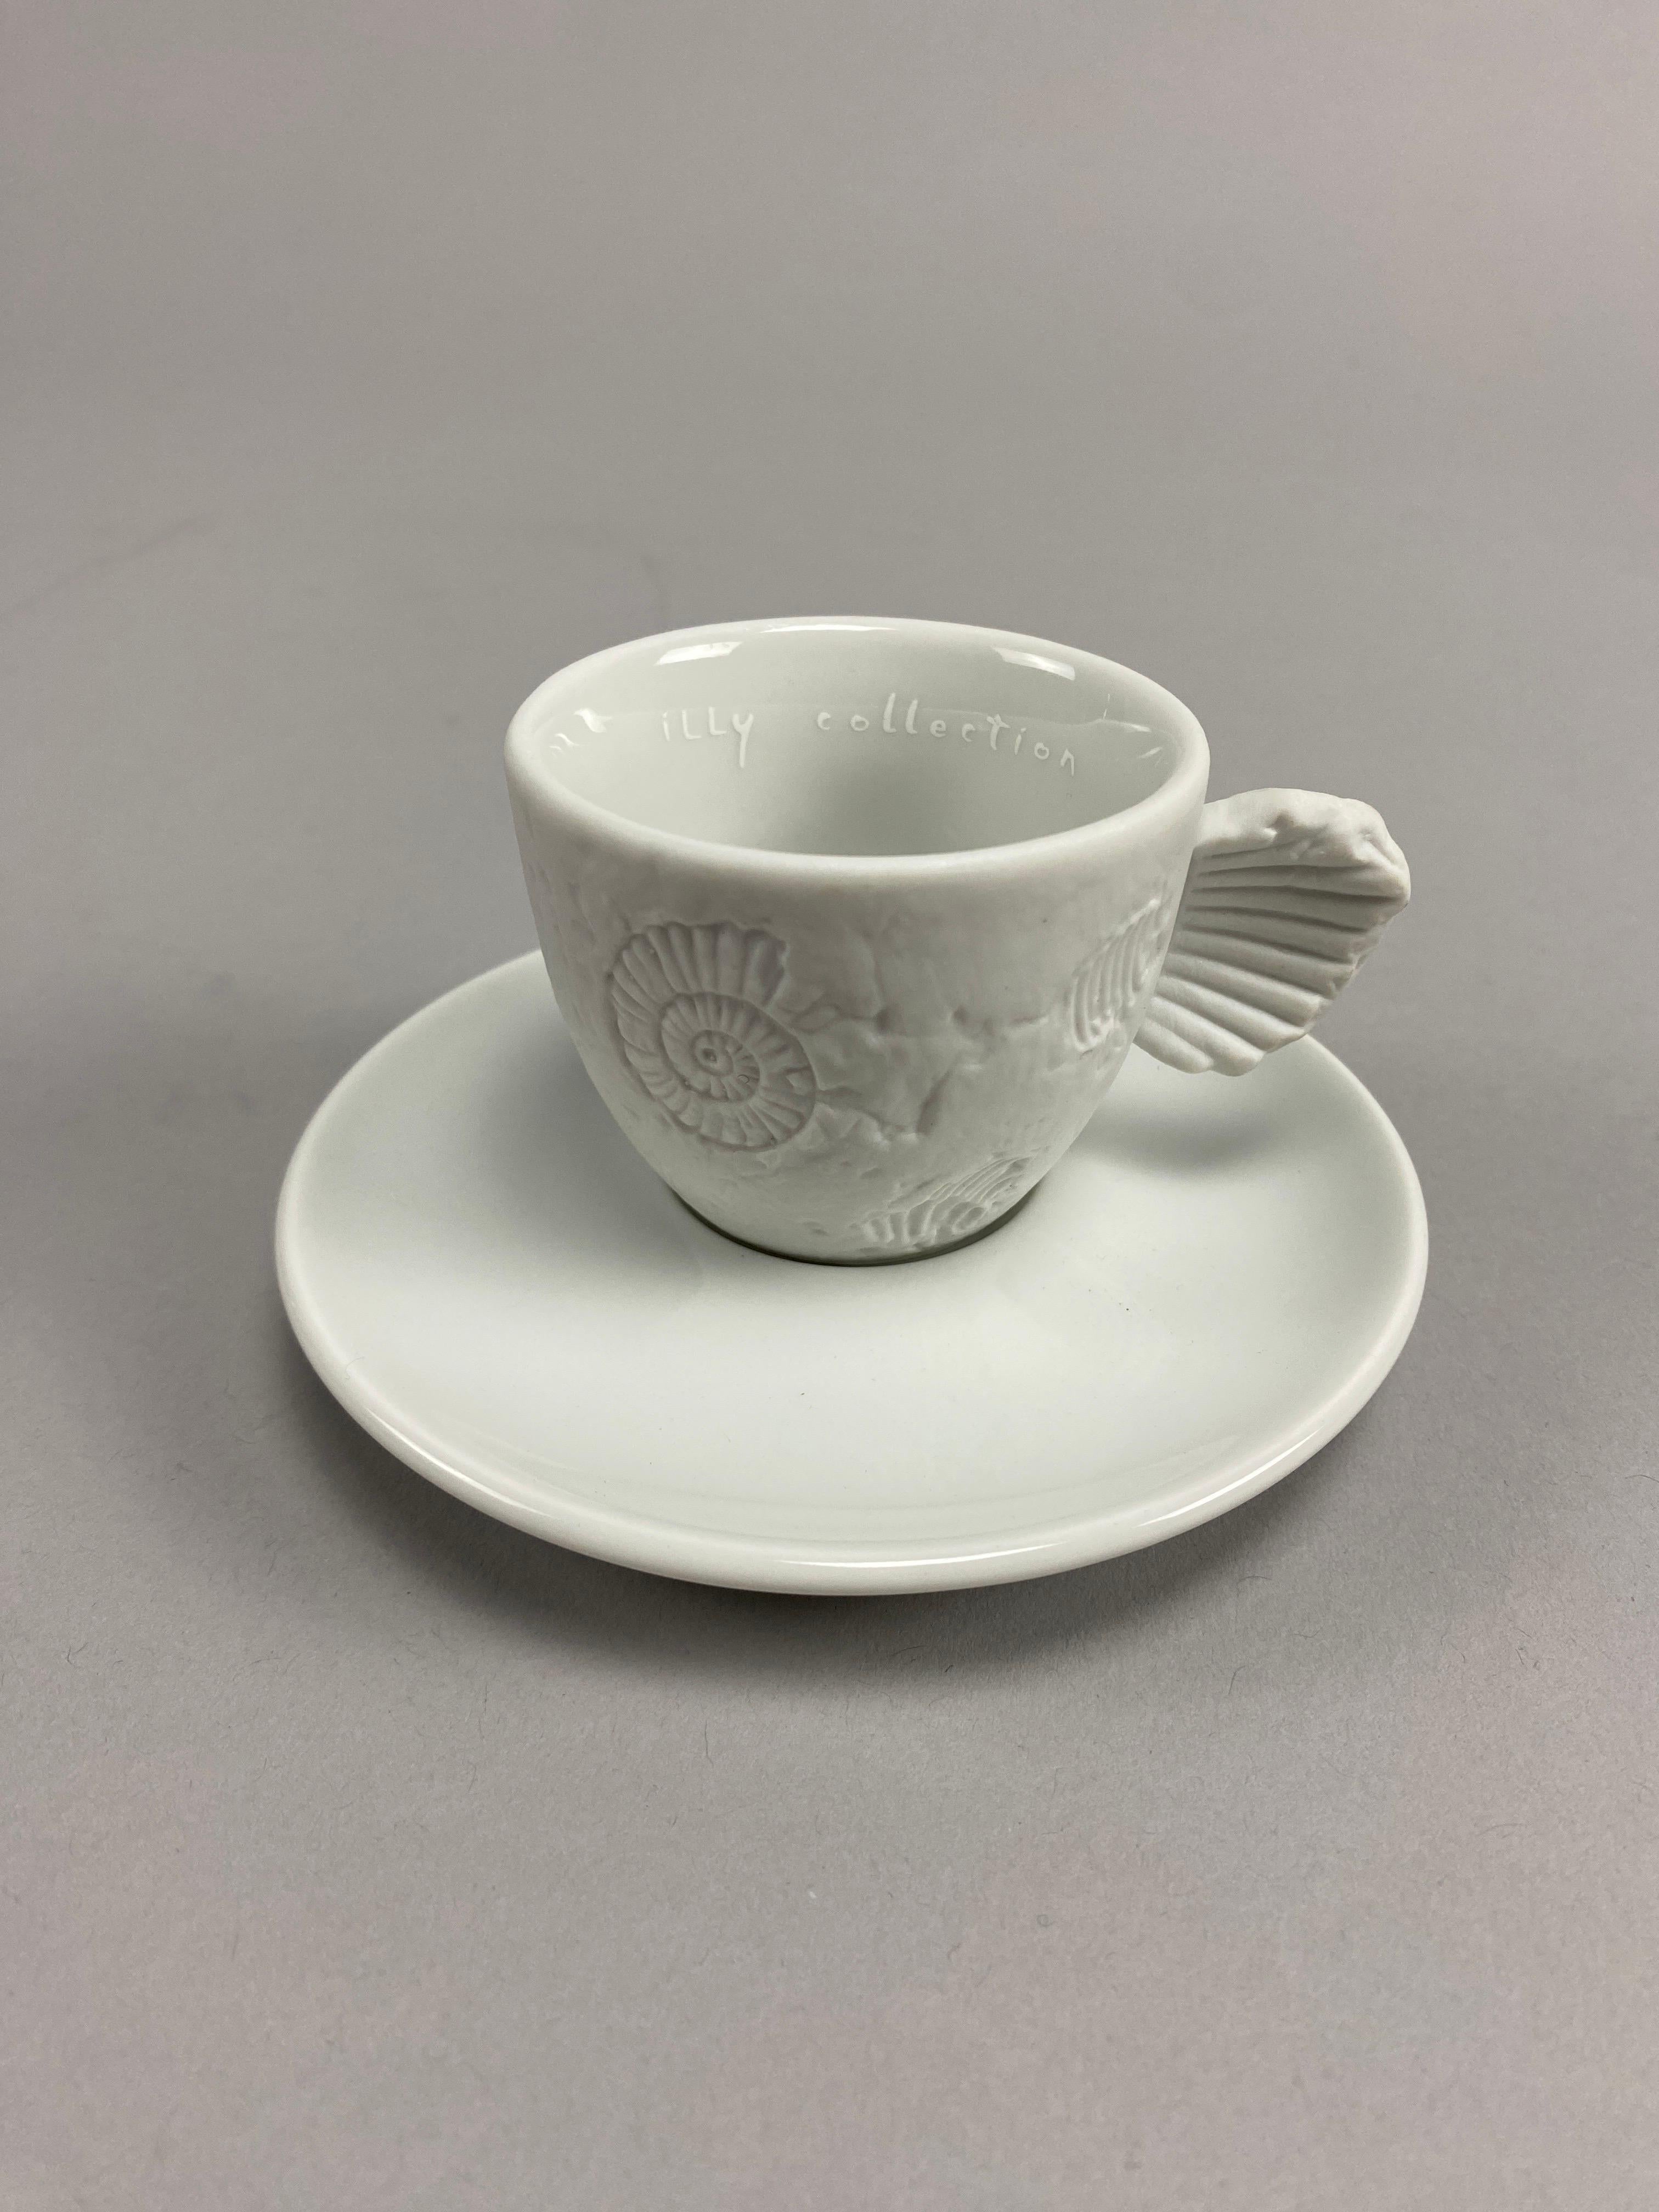 Fossile Espresso Cup by Paolo Rossetti for the Illy Collection In Good Condition For Sale In Weesp, NL